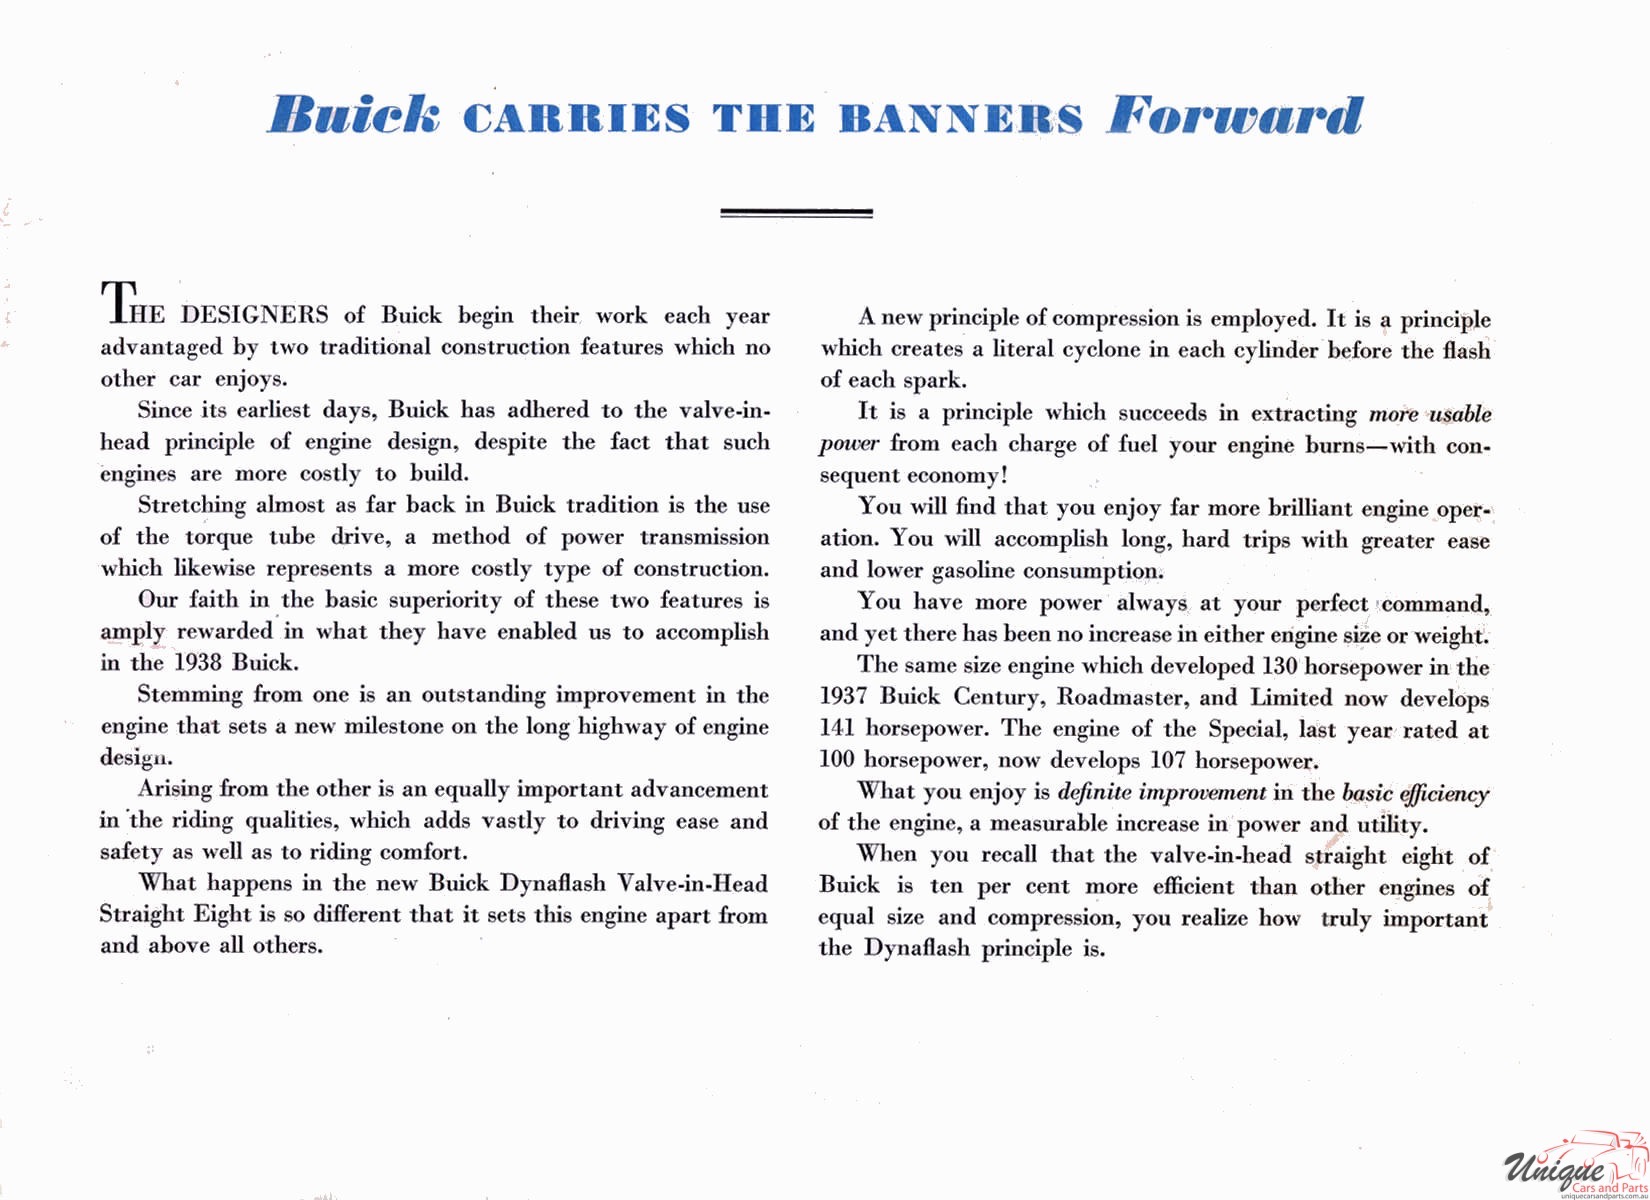 1938 Buick Brochure Page 8